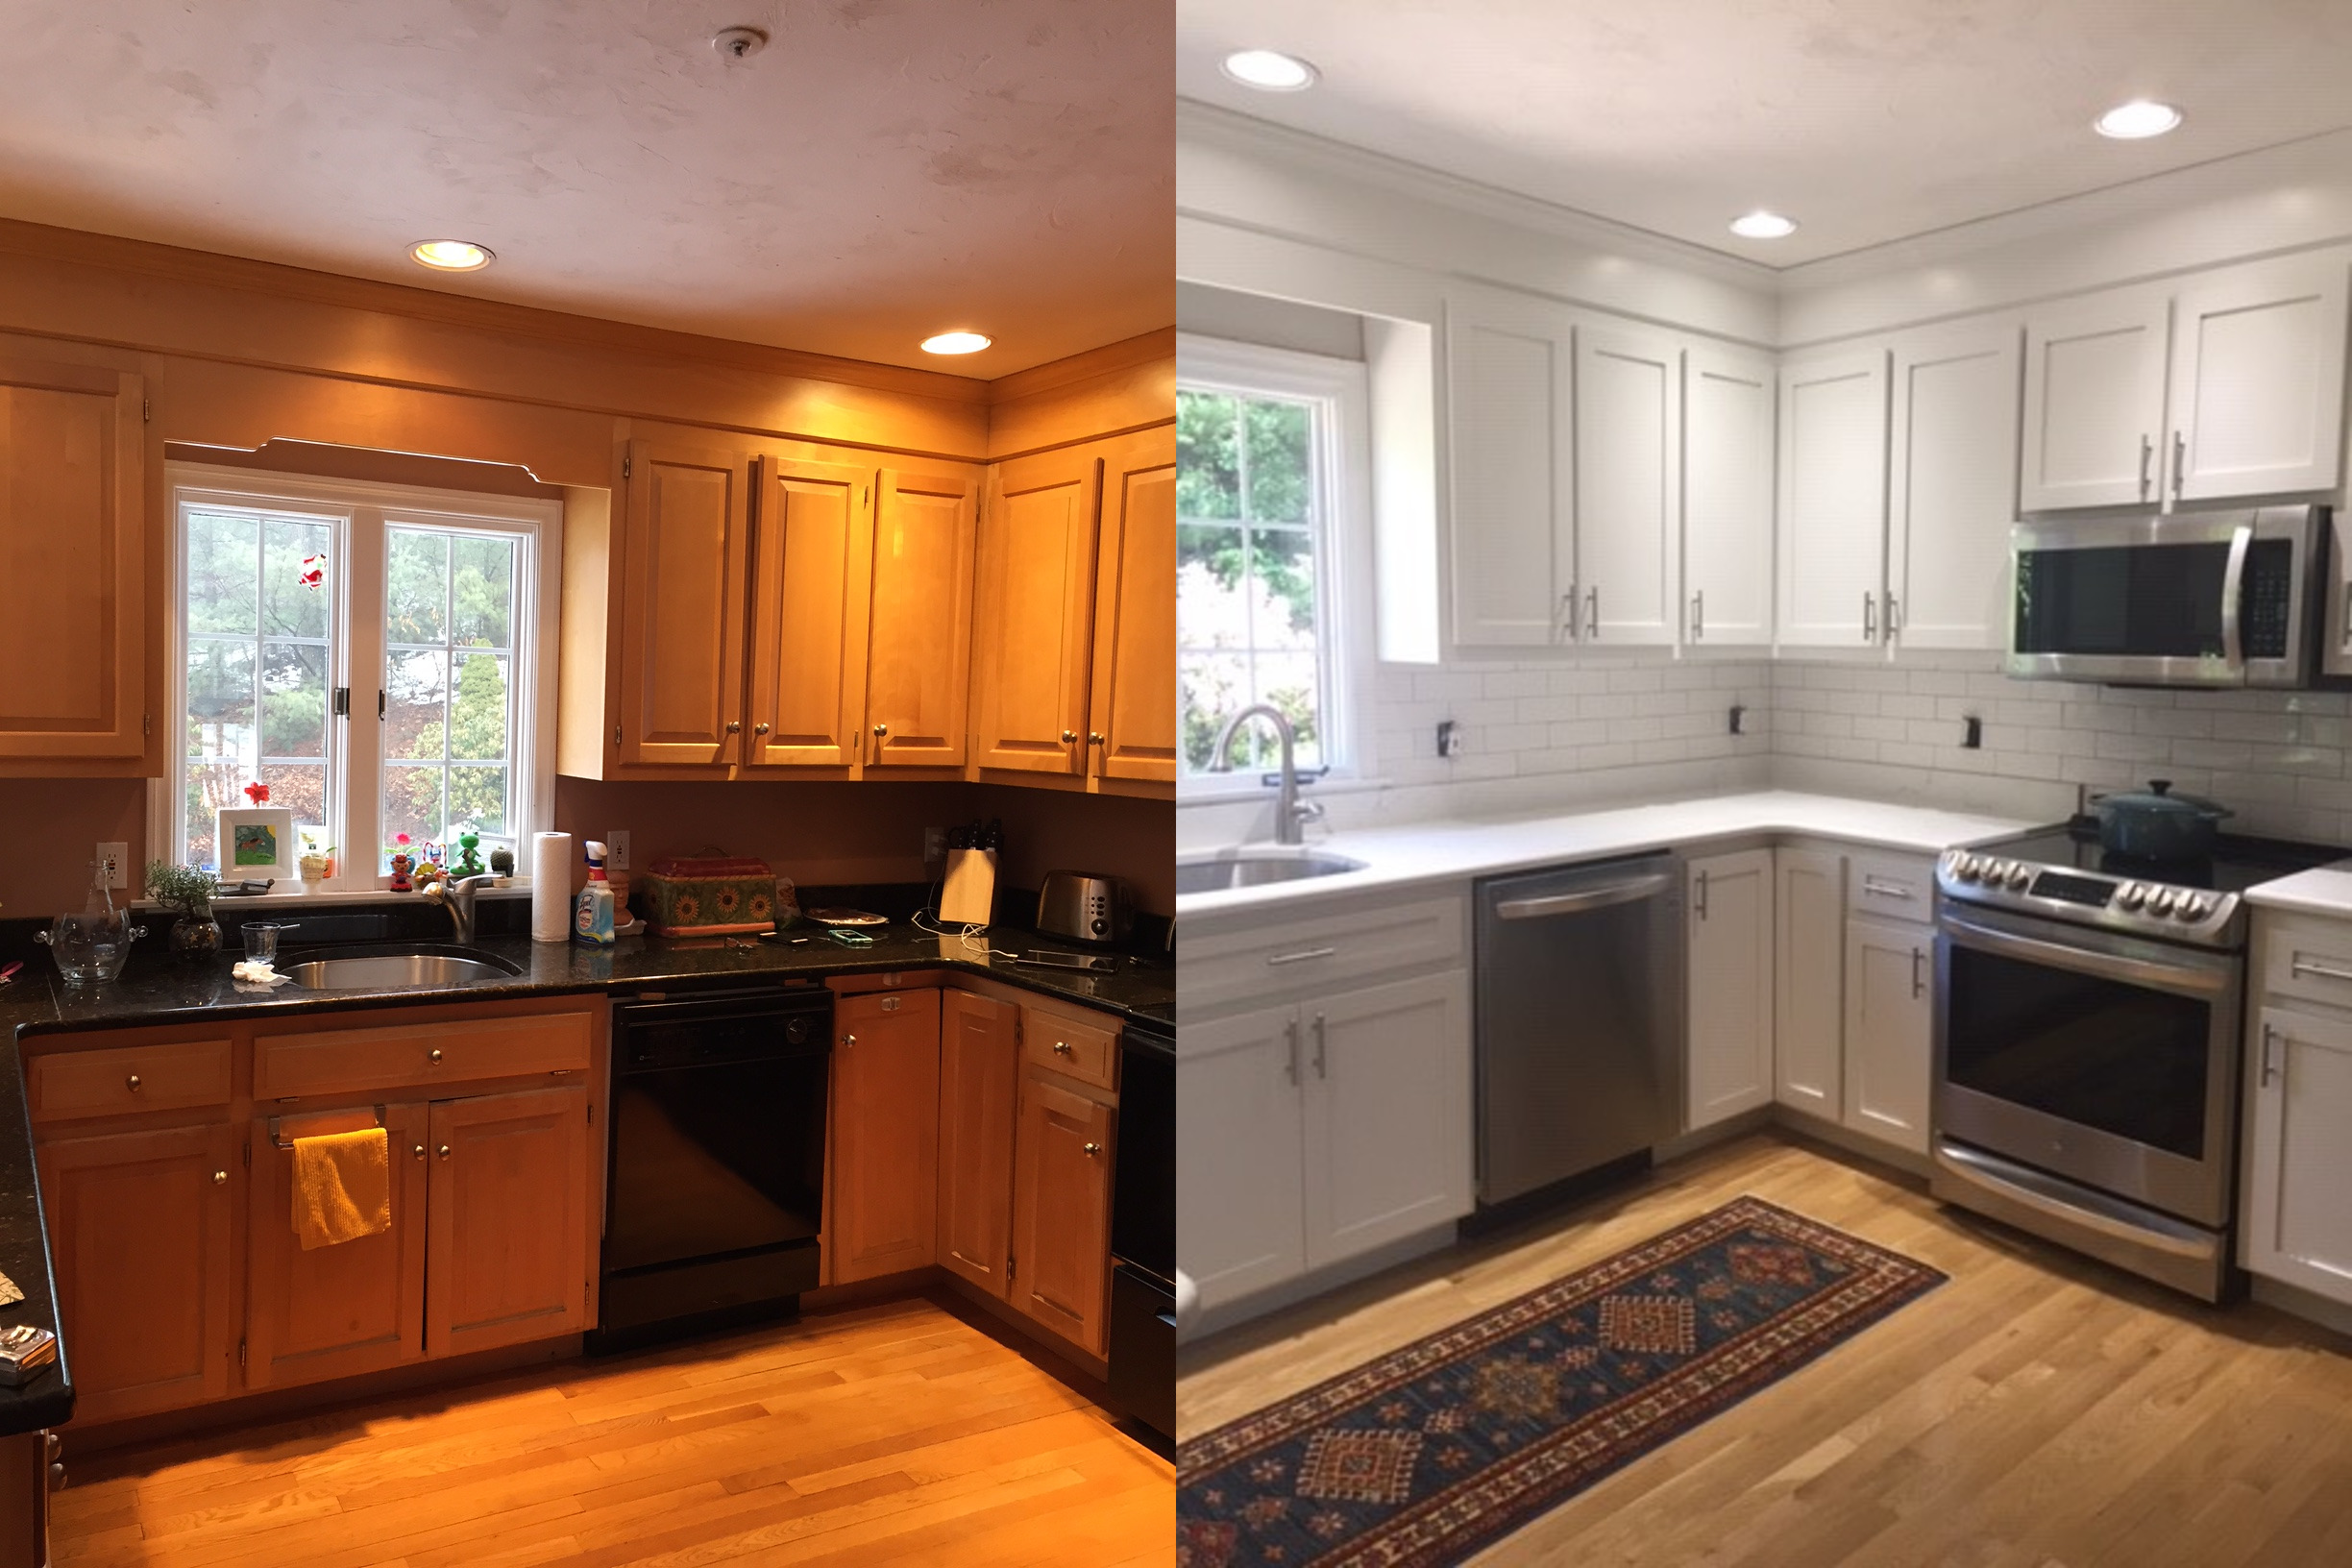 Colorful Kitchen Cabinet Transformation - The Perfect Finish Blog